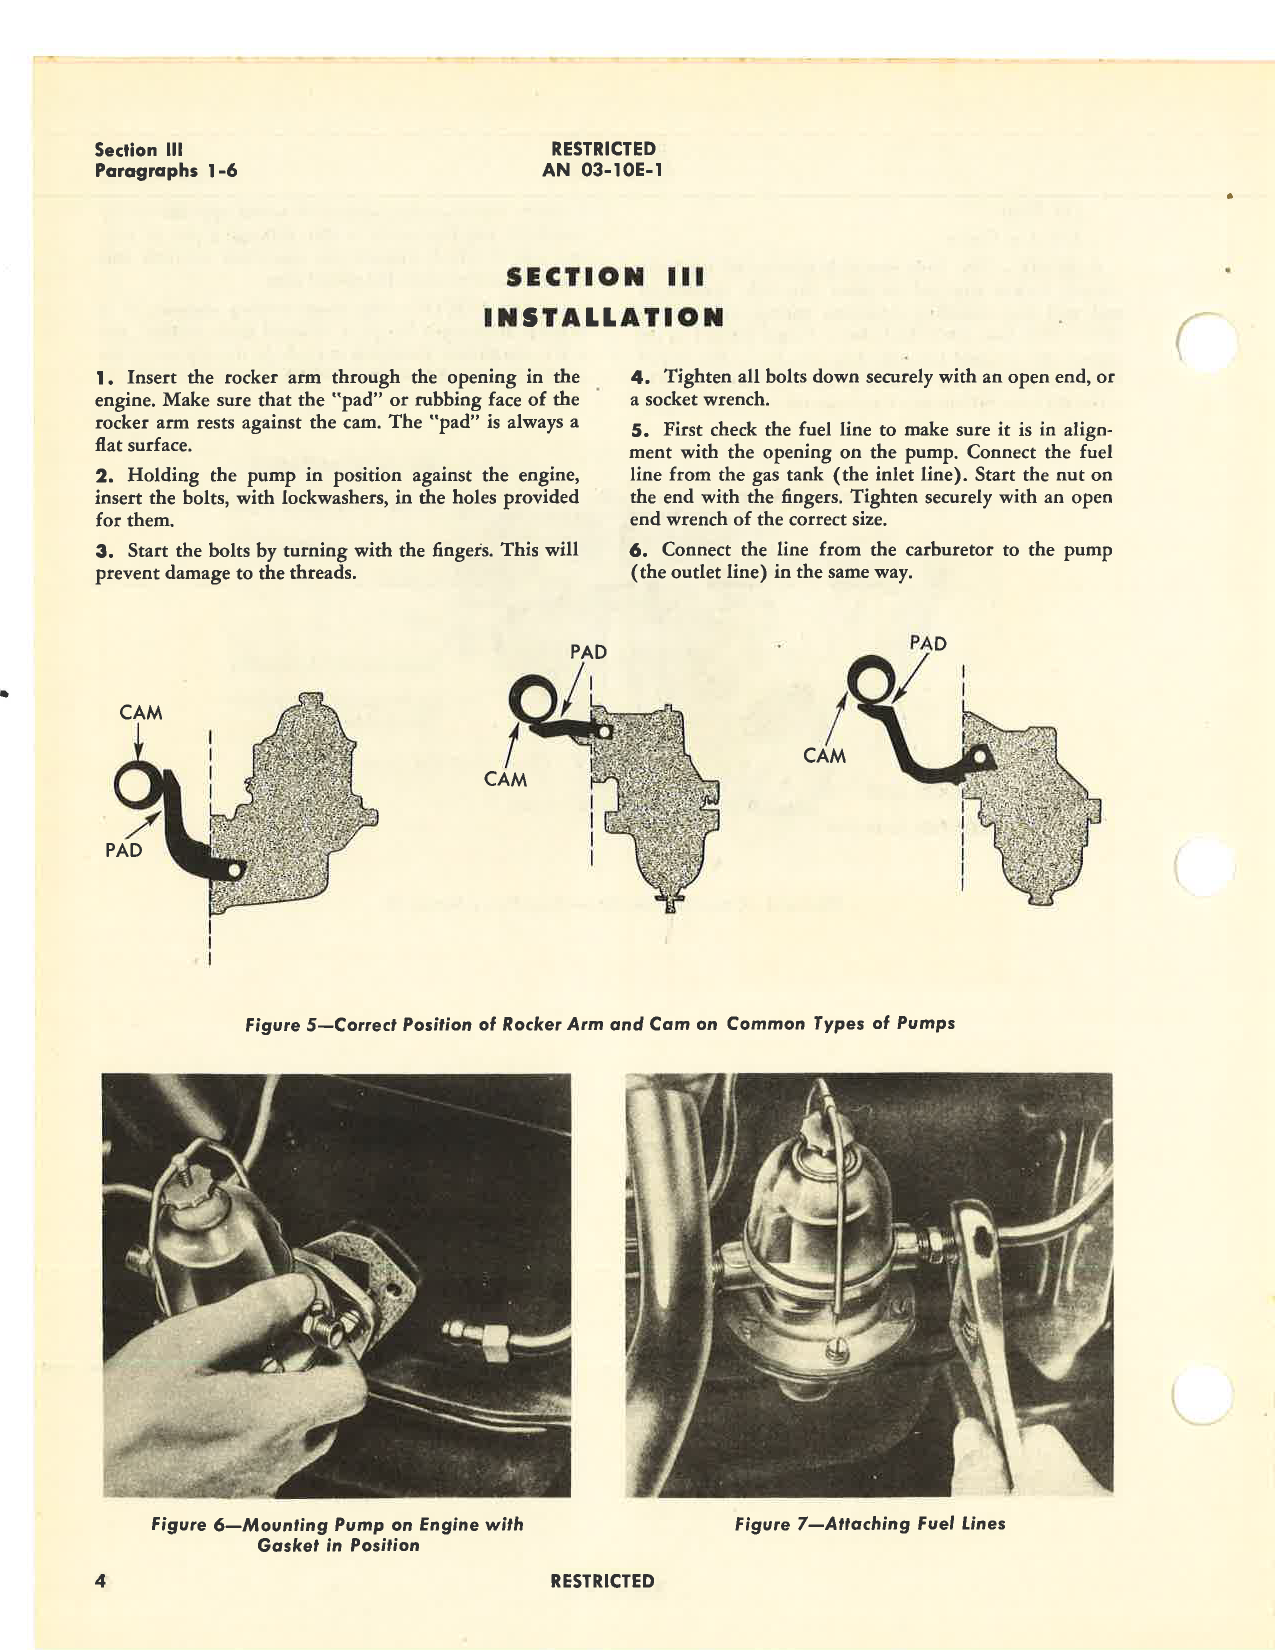 Sample page 8 from AirCorps Library document: Handbook of Instructions with Parts Catalog for Types AC, BF, and R Fuel Pumps